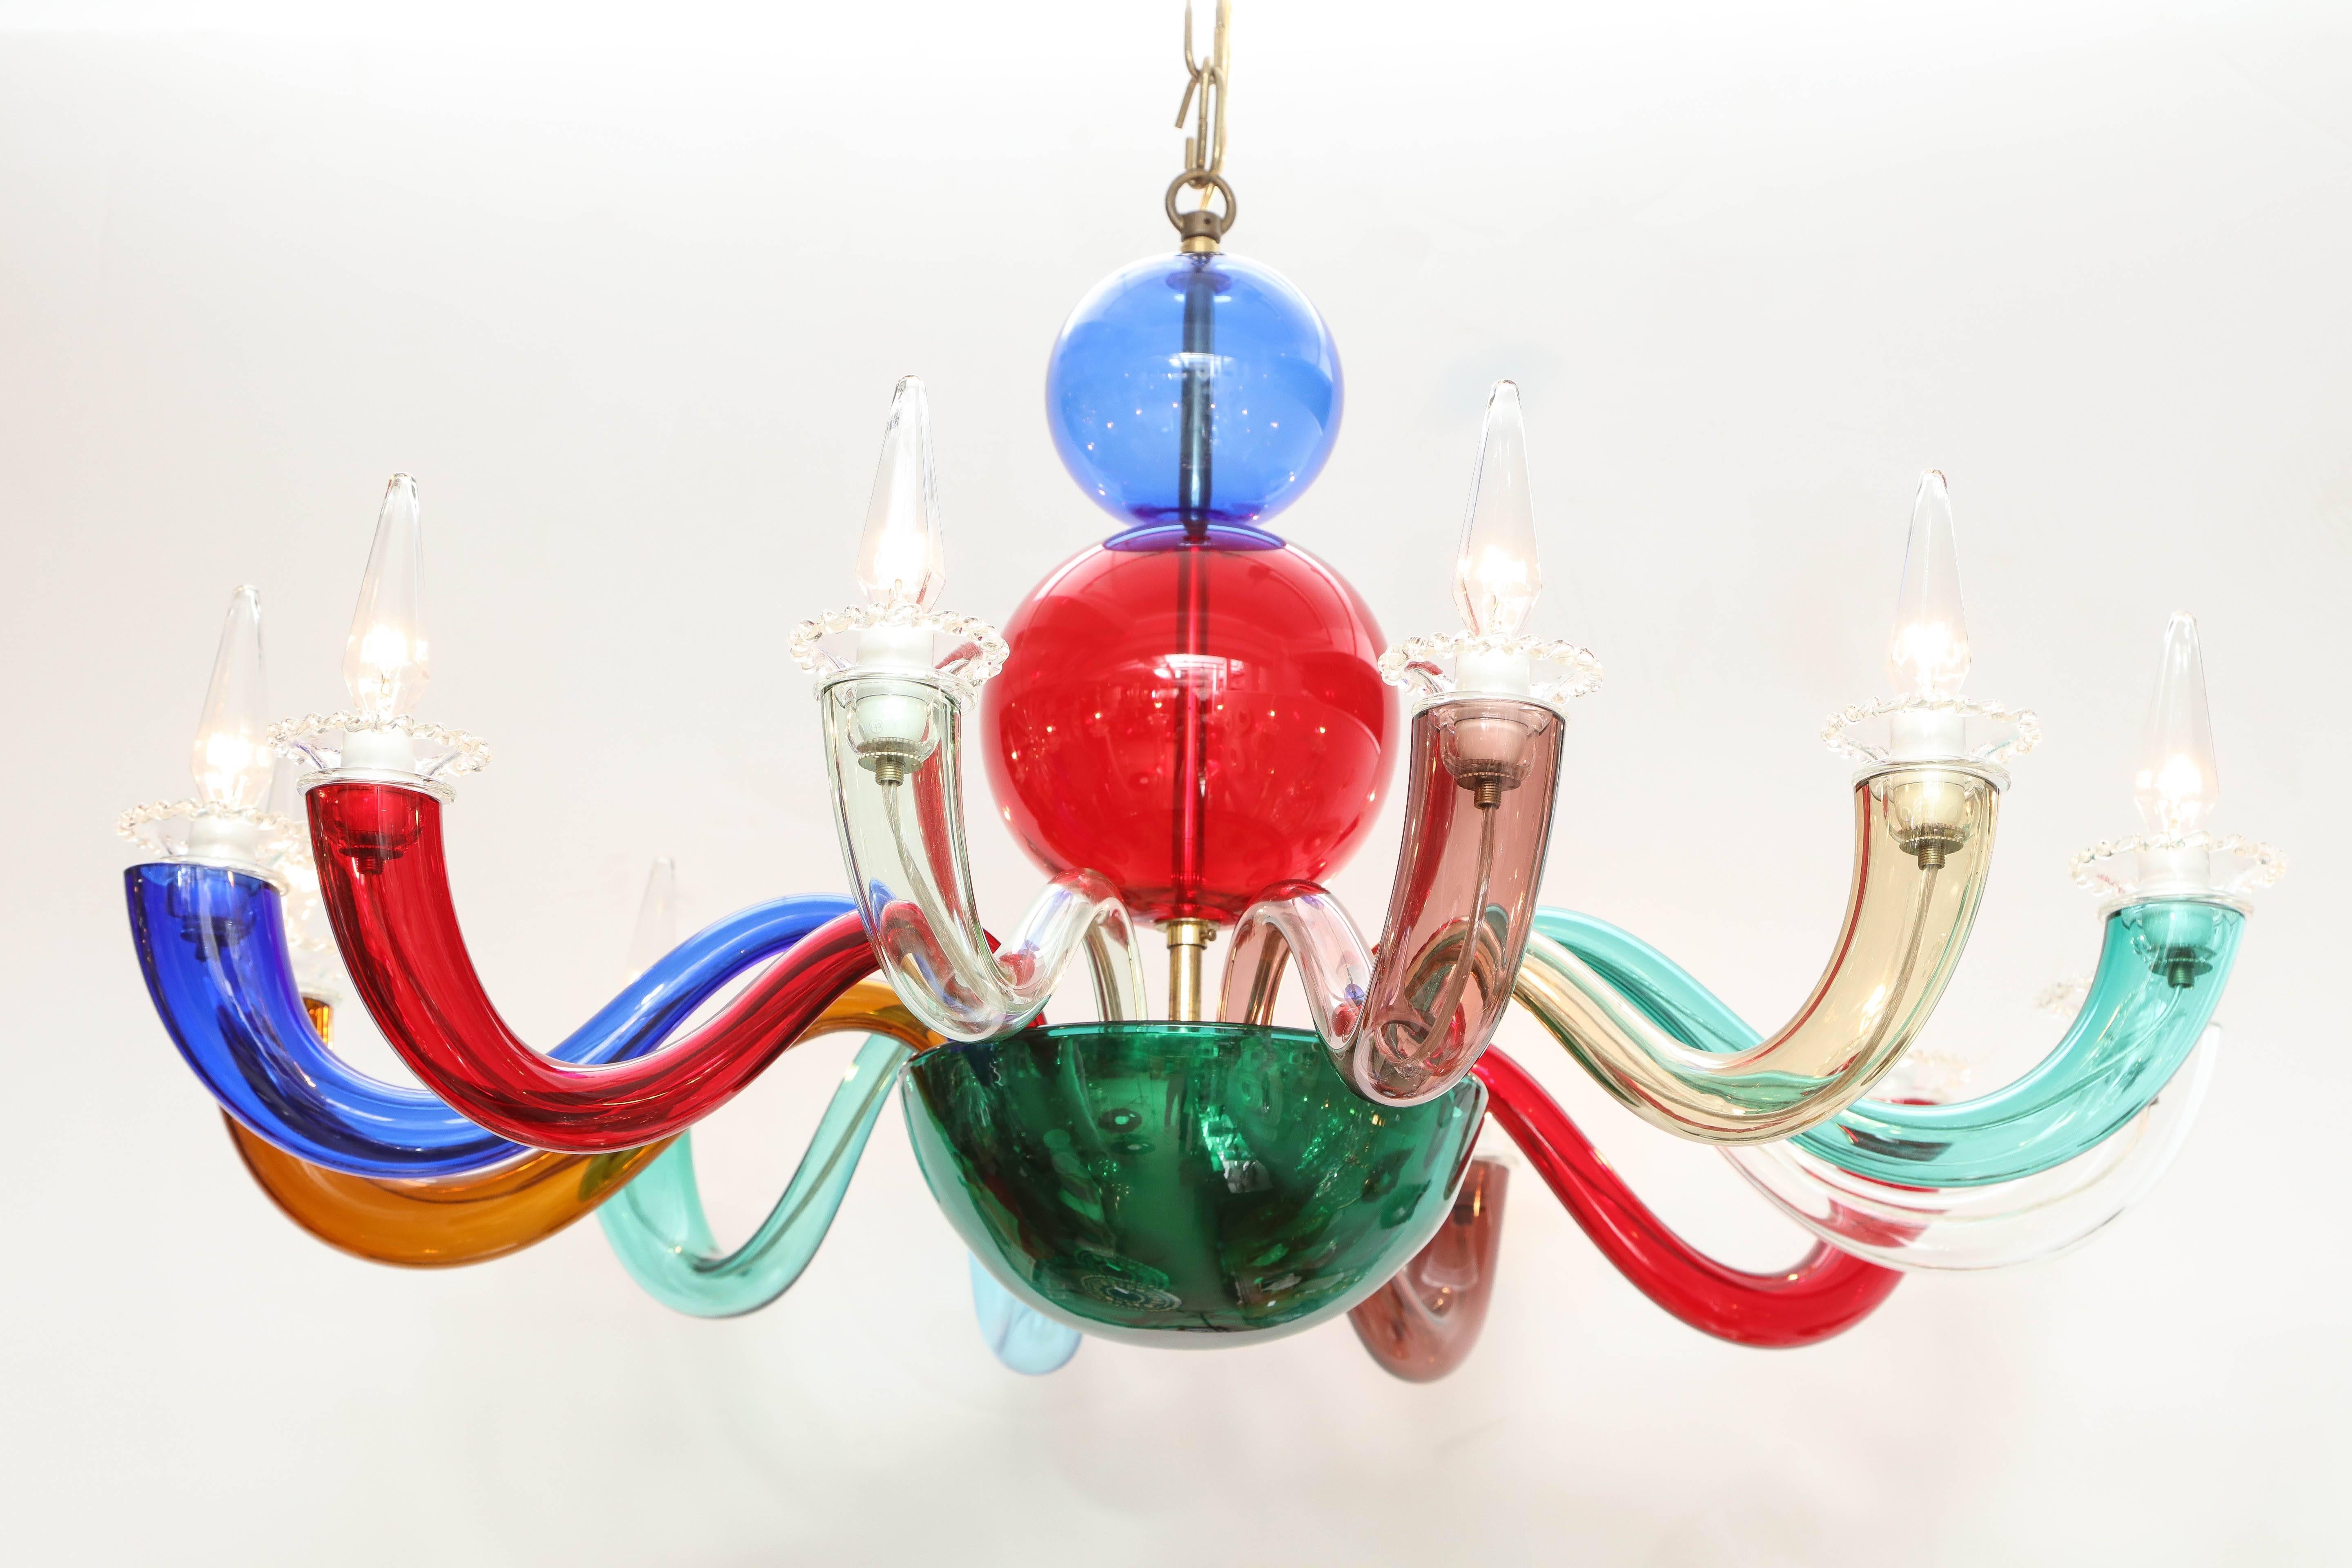 Gio Ponti Signed Venini Twelve-Arm Chandelier In Excellent Condition For Sale In New York, NY